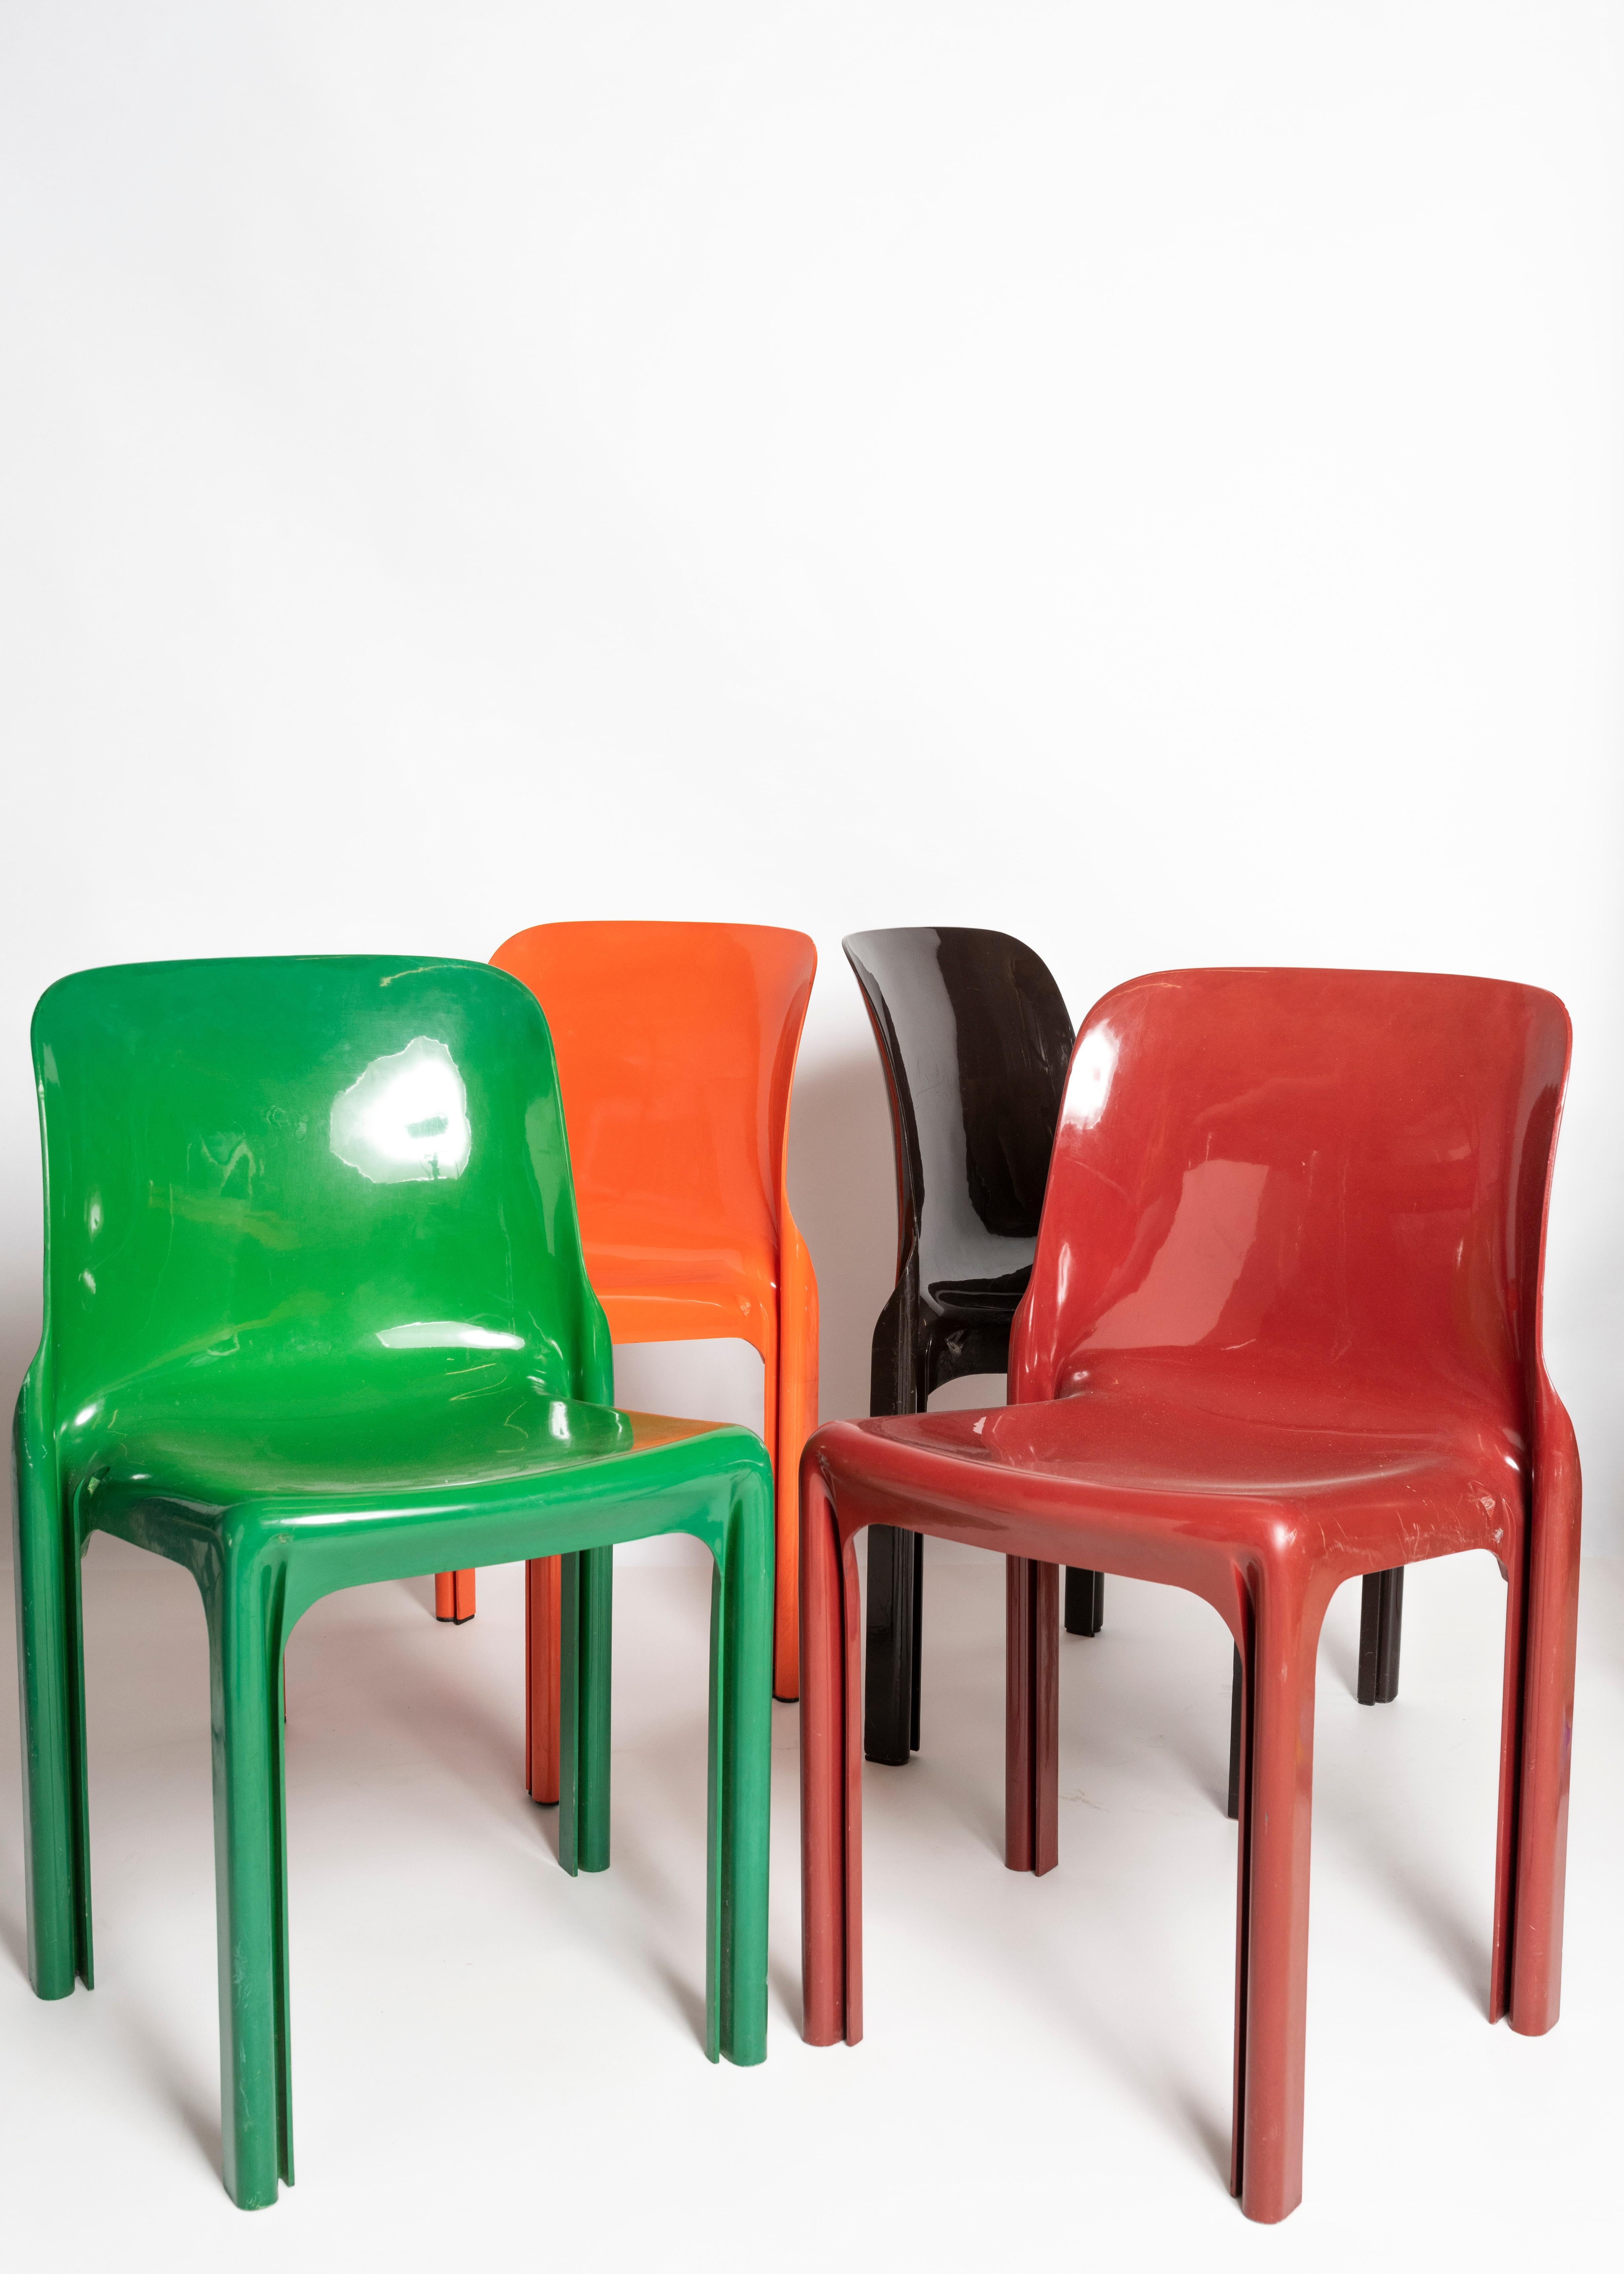 Stackable 'Selene' chairs designed by Vico Magistretti and manufactured by Atremide in Italy. These chairs are made of compression-moulded fibreglass and are available in orange, red, green, white and dark brown.